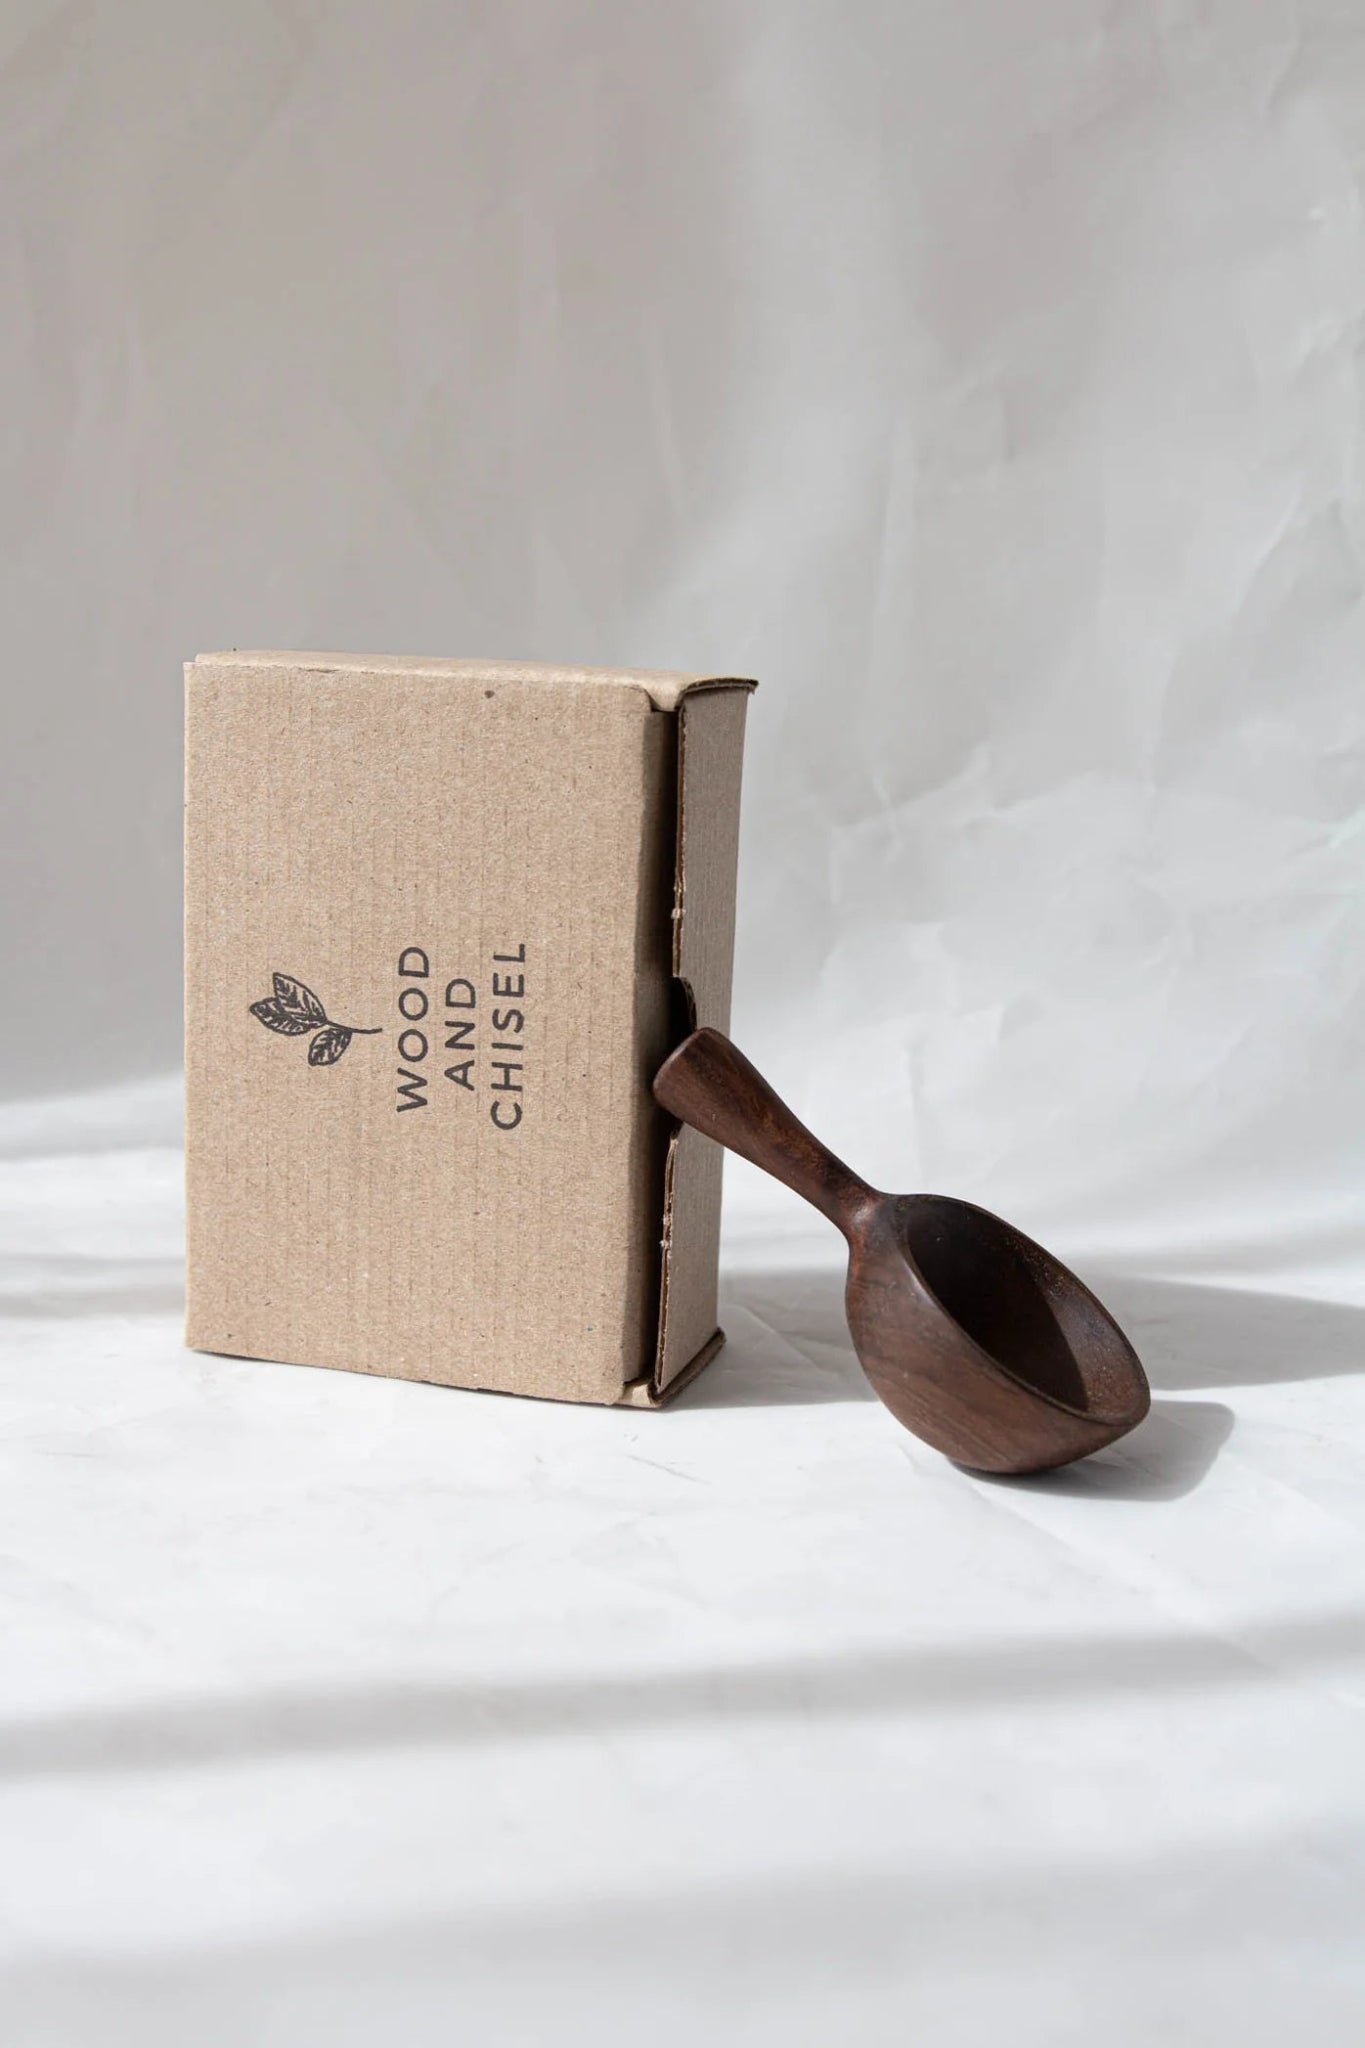 Wood and Chisel - Tōtara Coffee Scoop - The Flower Crate